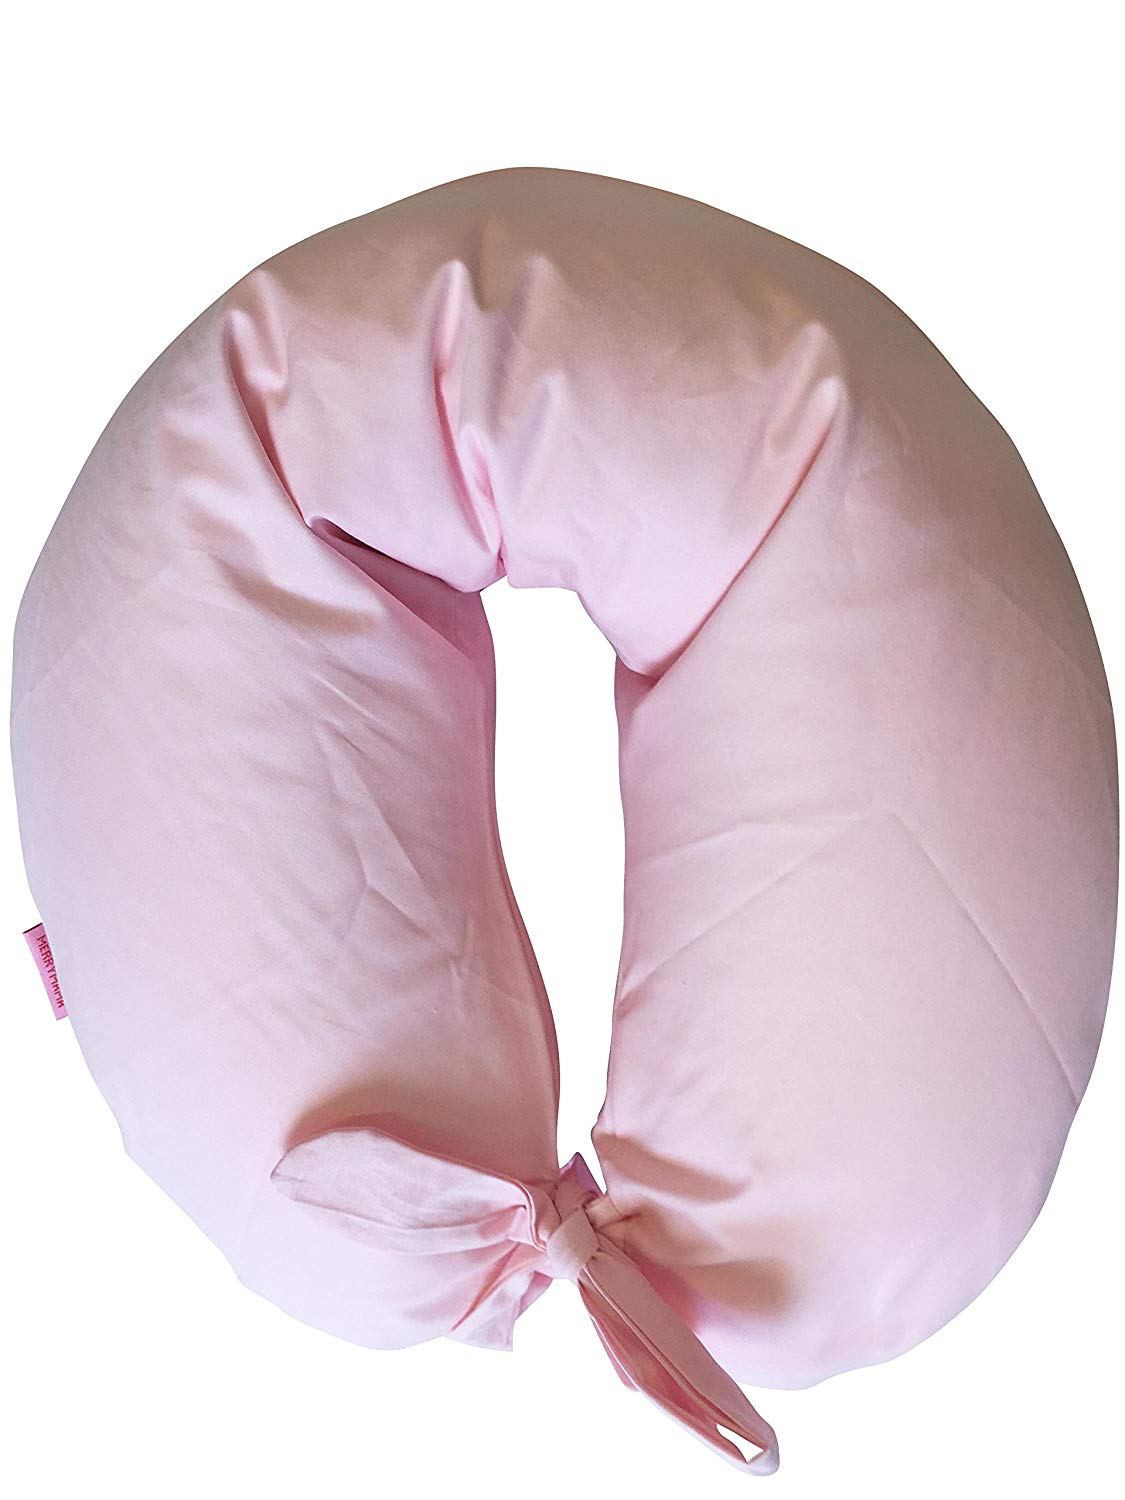 Merrymama – Filled with Organic Spelt Nursing Pillow and Lining with laces/130) pink